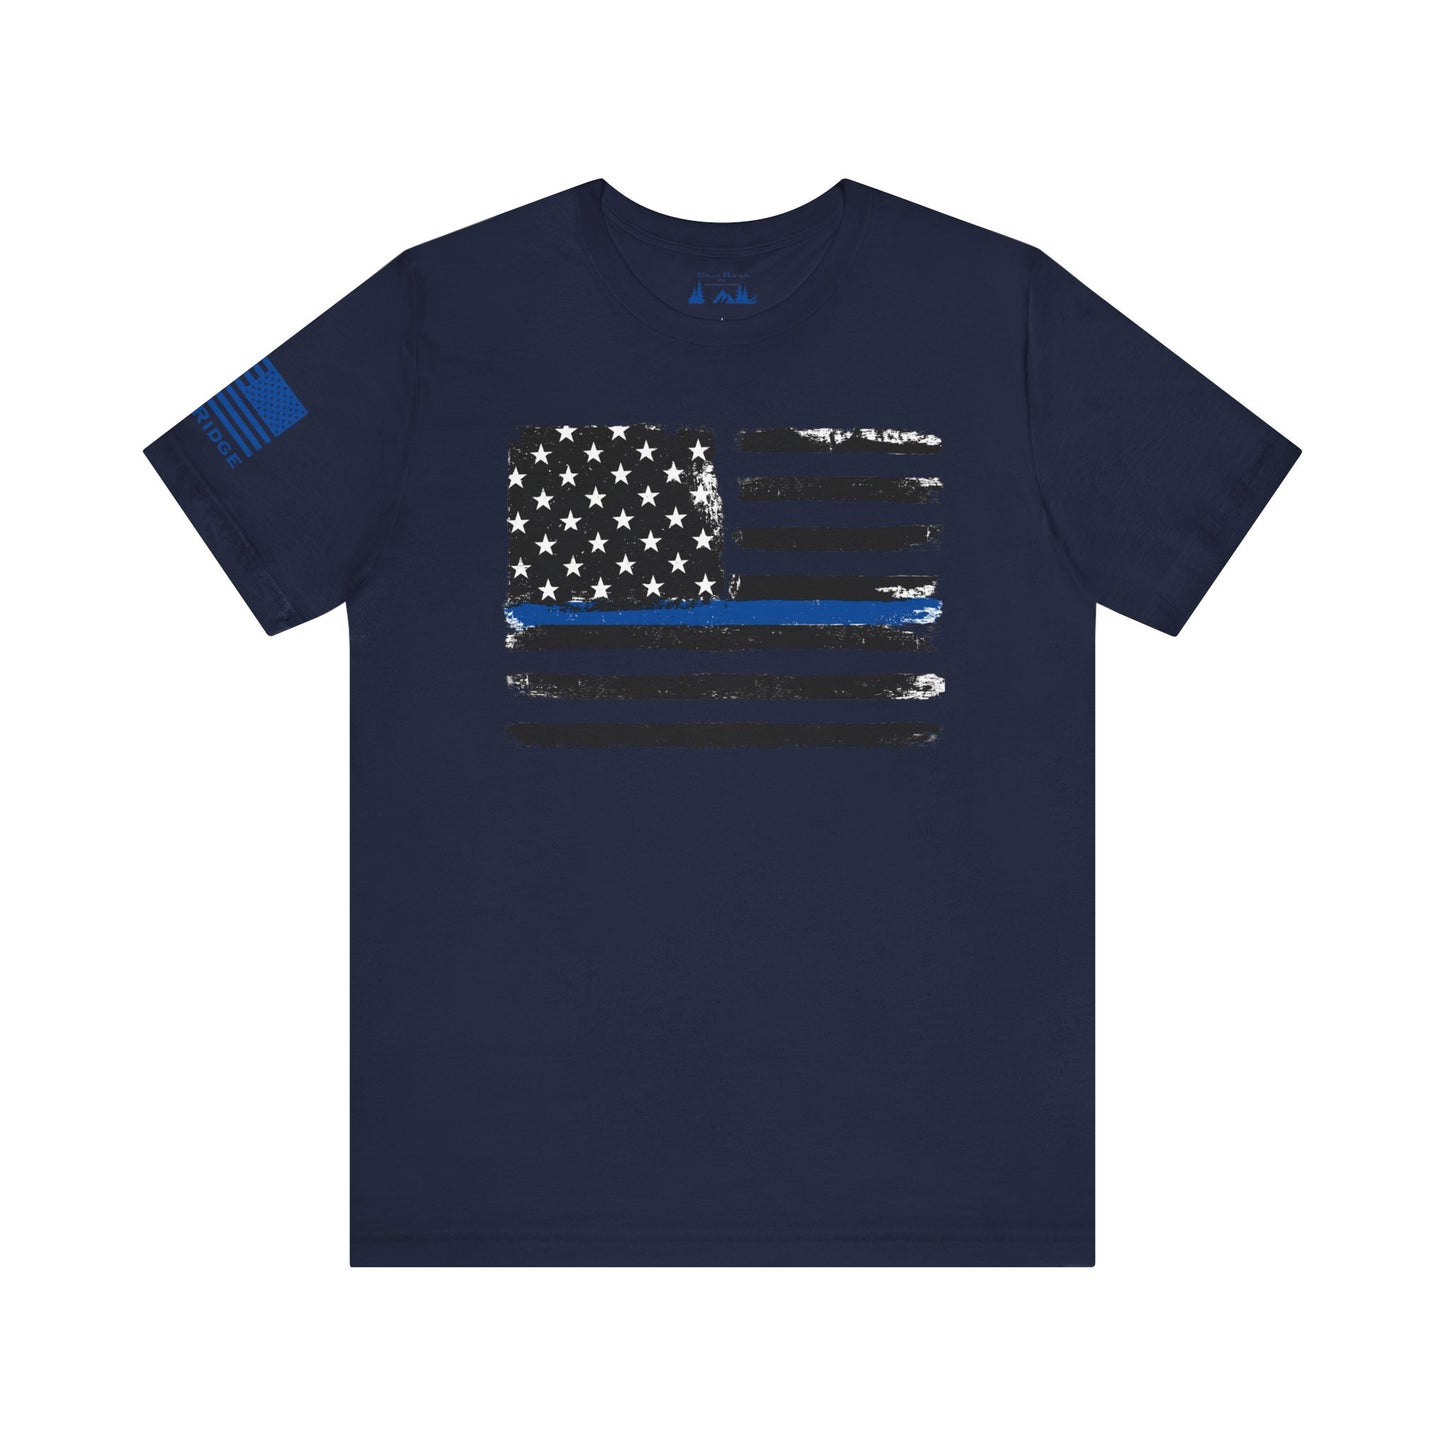 AMERICAN FLAG WITH BLUE LINE POLICE - Blue logos